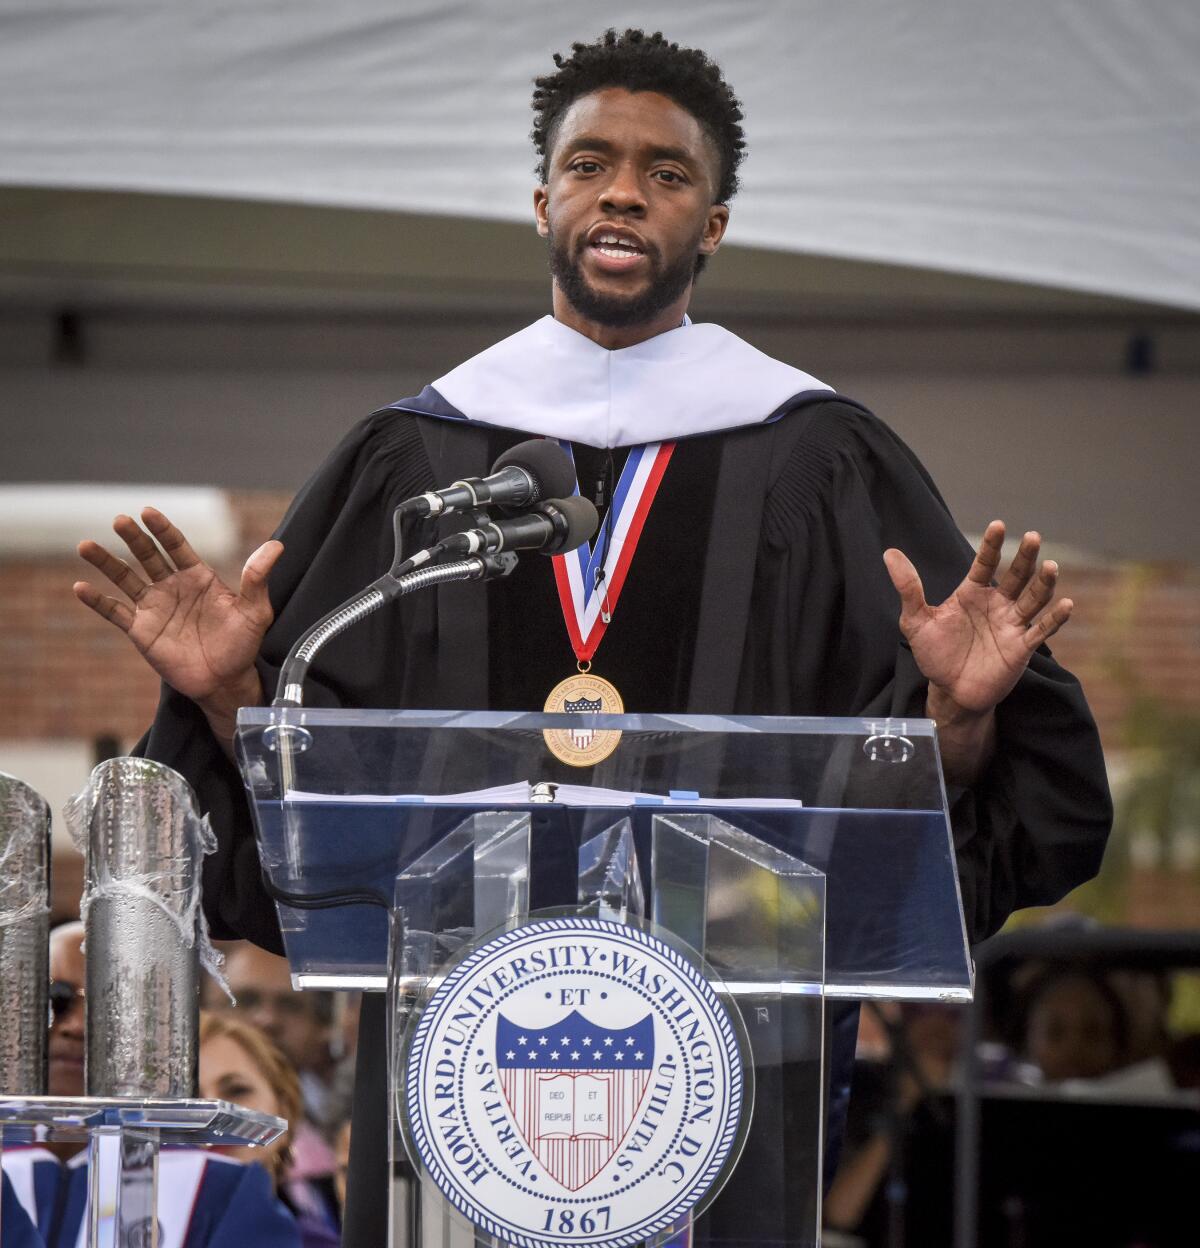 Chadwick Boseman at Howard University's commencement ceremonies in 2018